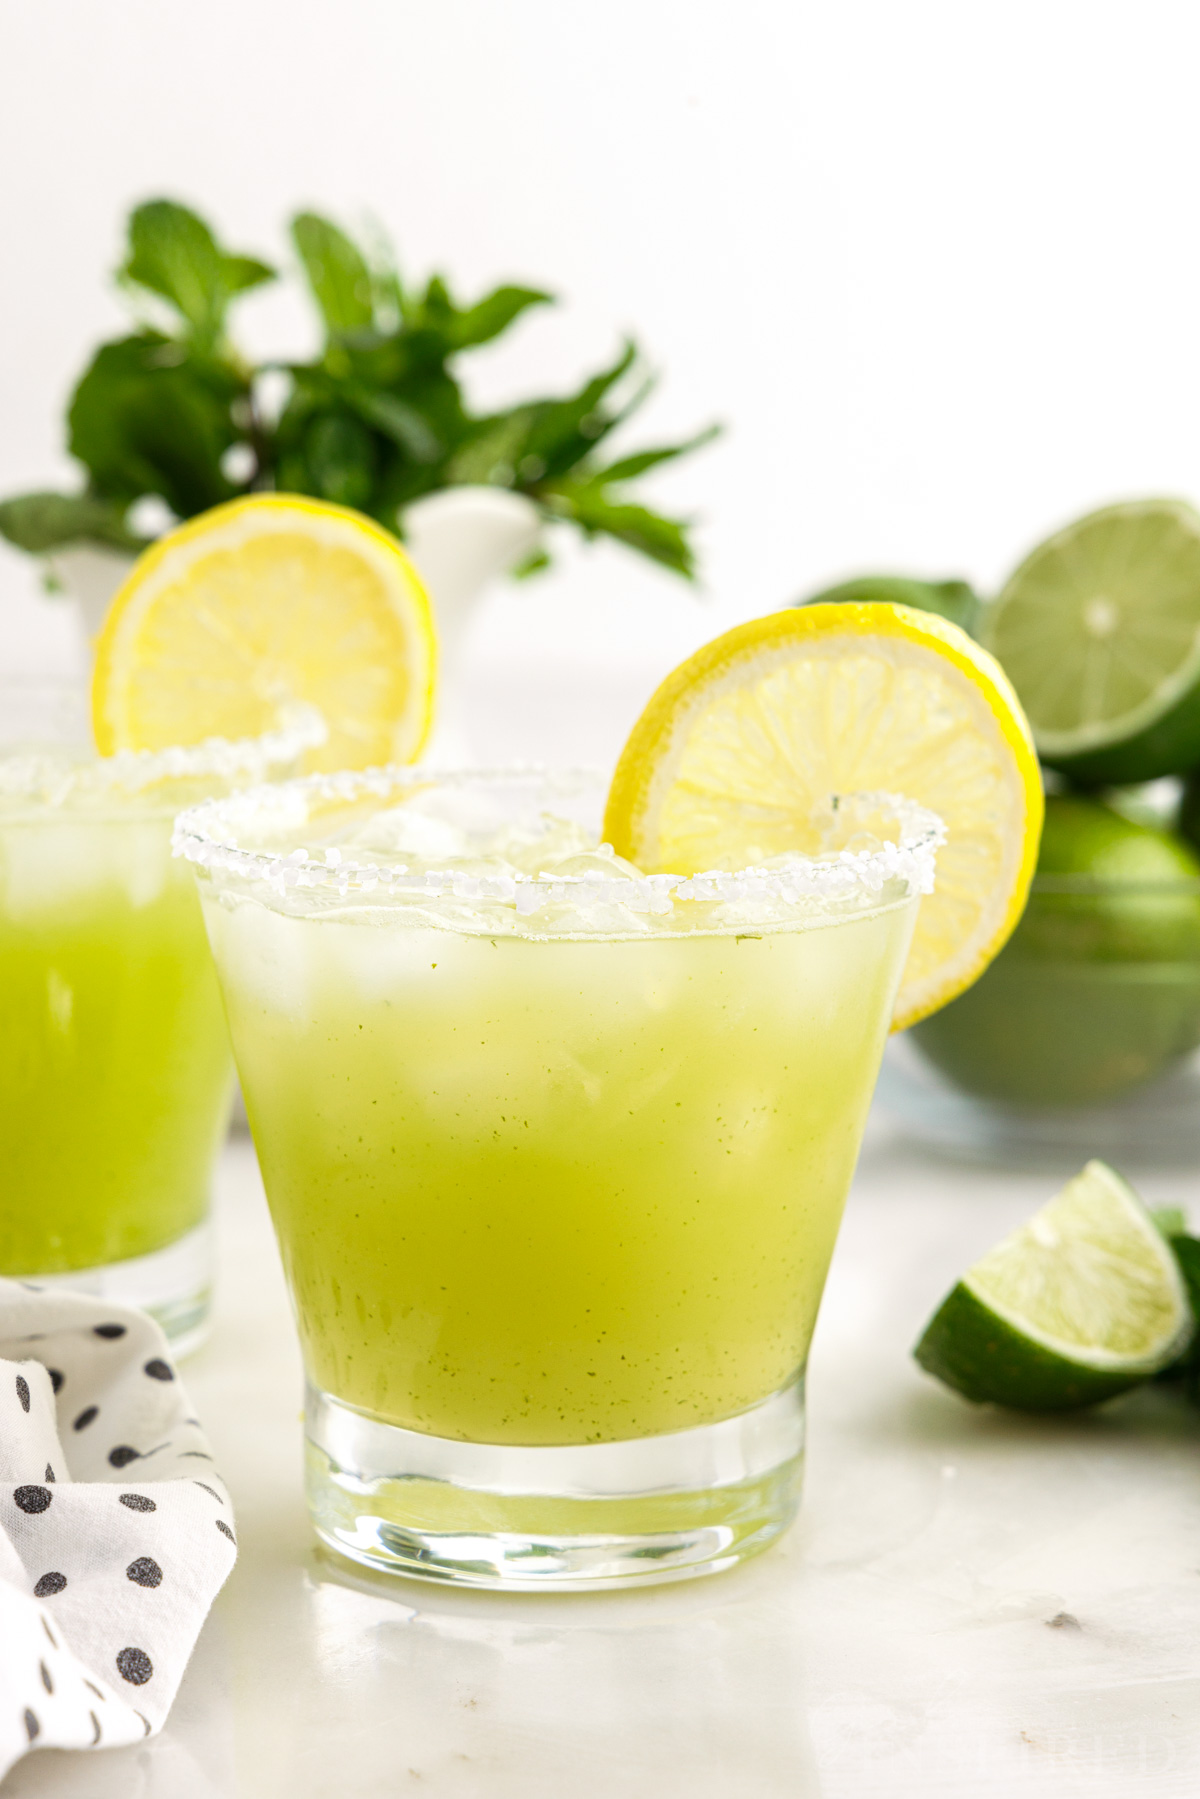 Two short glasses of Mint Margarita garnished with lemons, limes in the background.